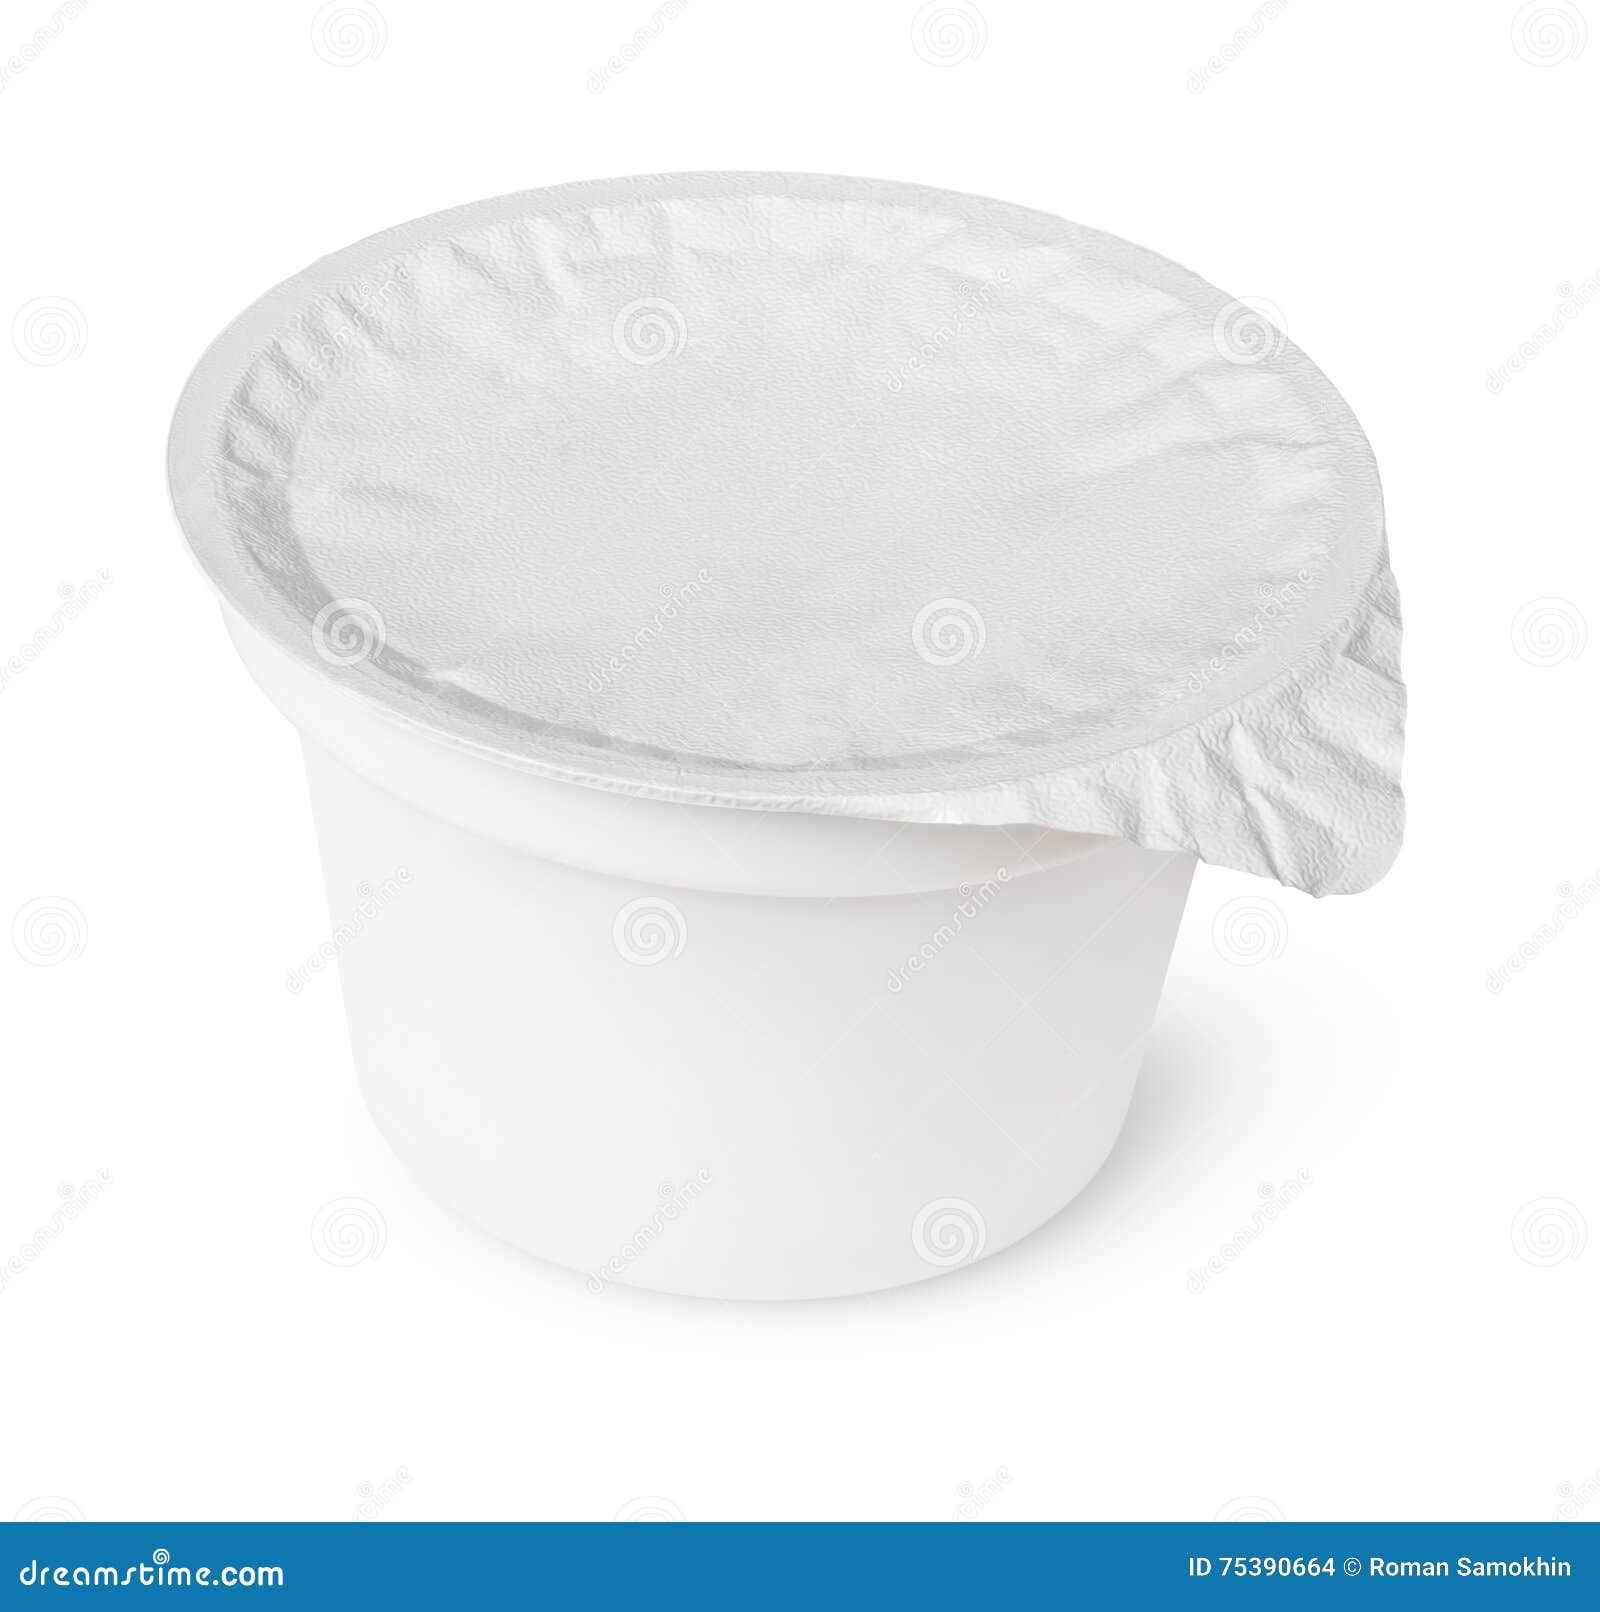 White Plastic Container For Dairy Foods With Foil Lid Stock Photo